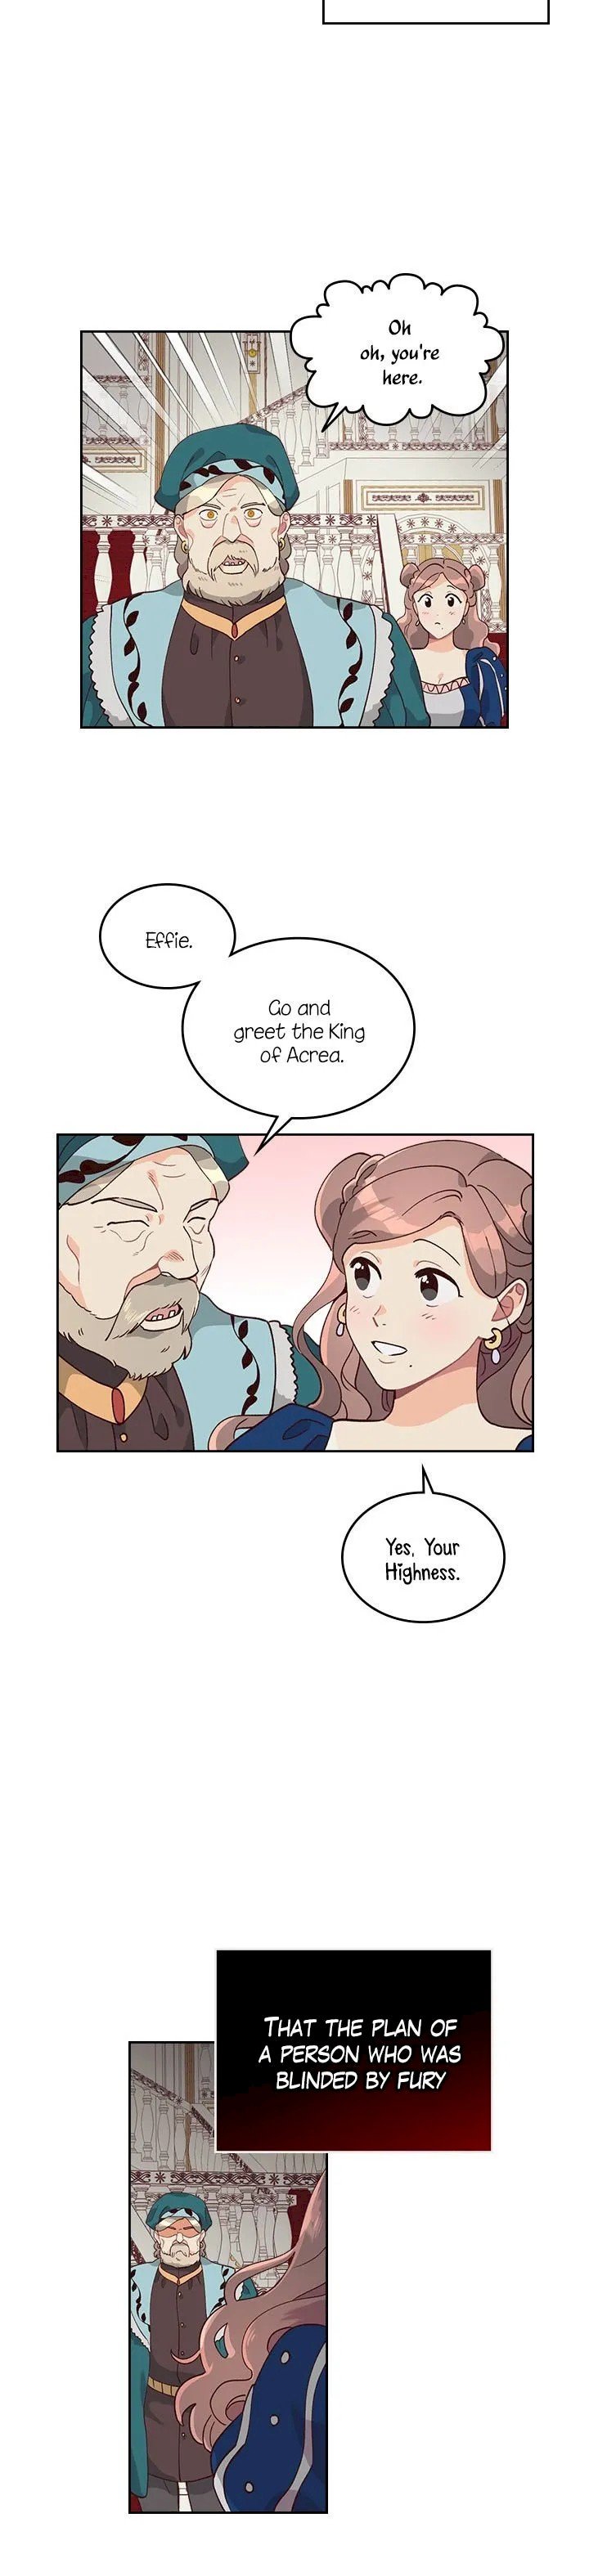 emperor-and-the-female-knight-chap-29-17